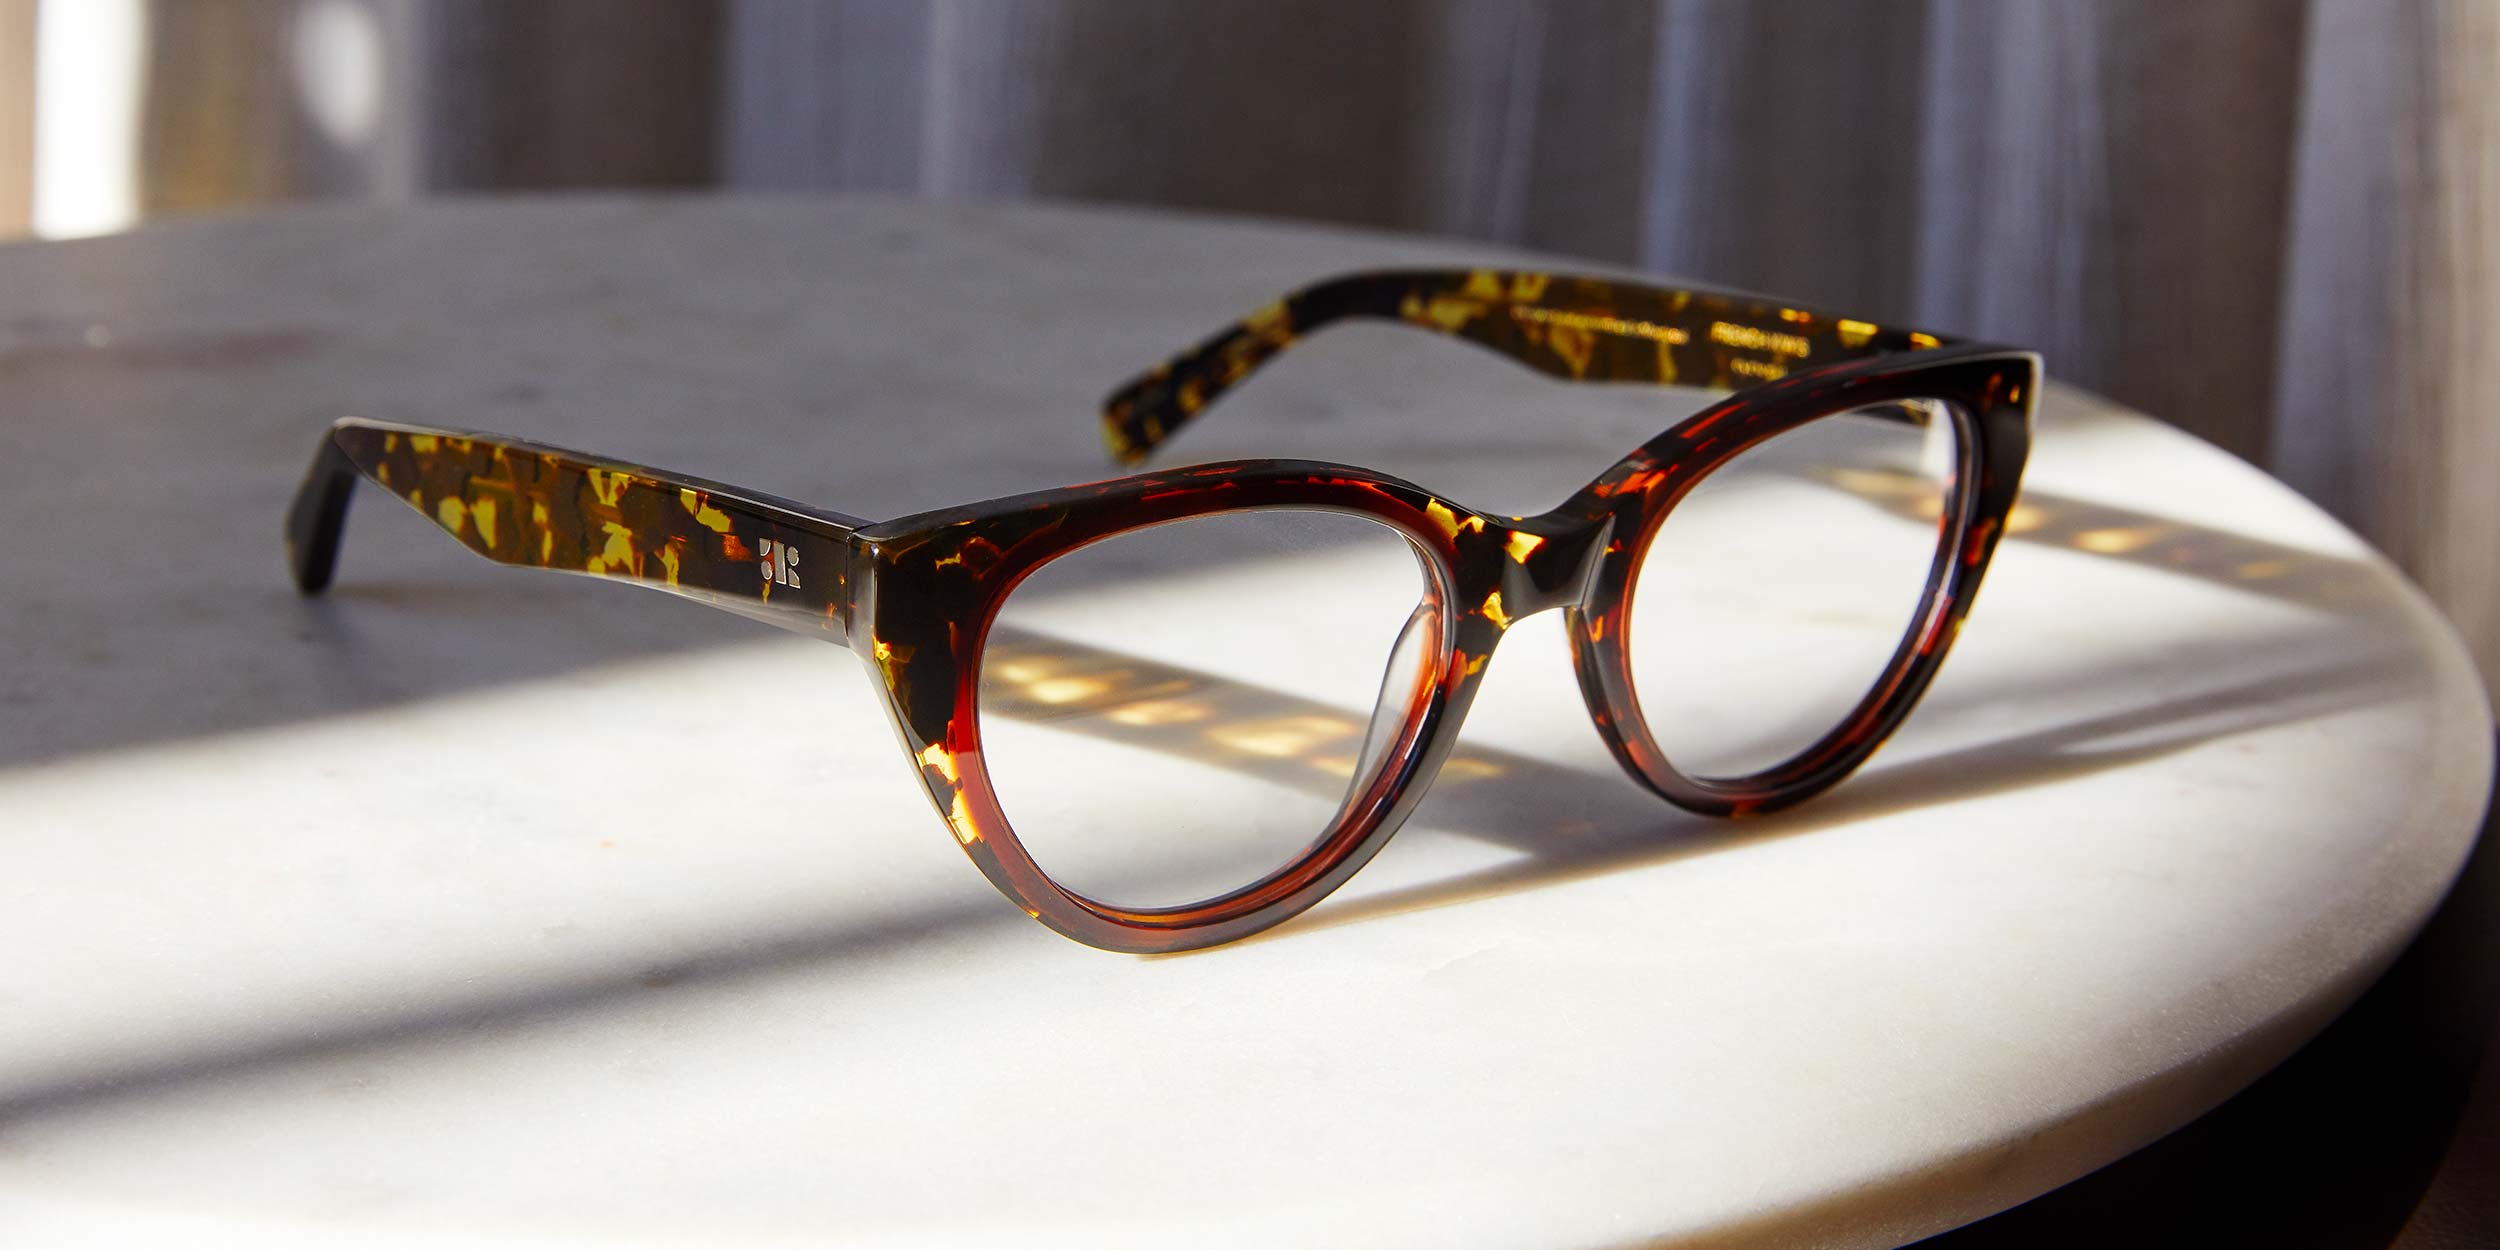 Photo Details of Colette Cherry Reading Glasses in a room